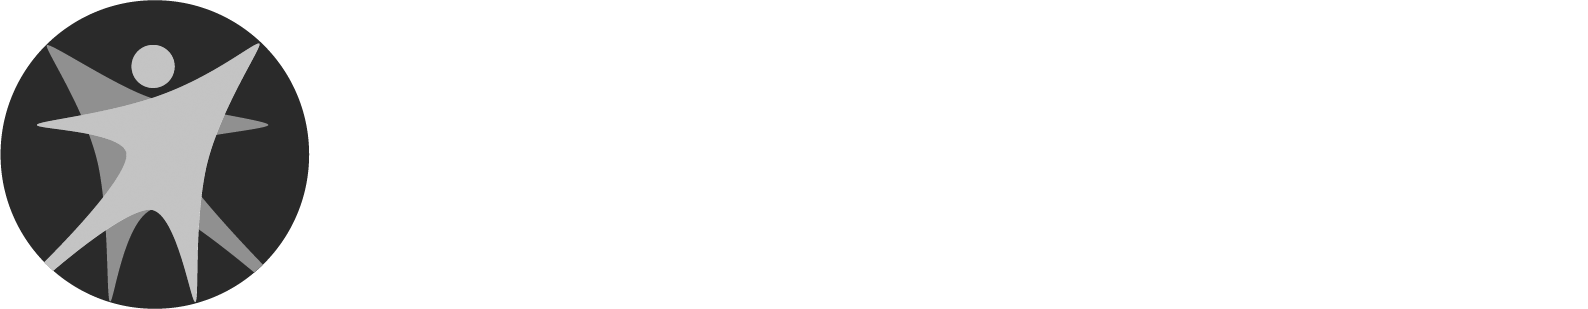 Wisconsin Department of Health and Human Services logo